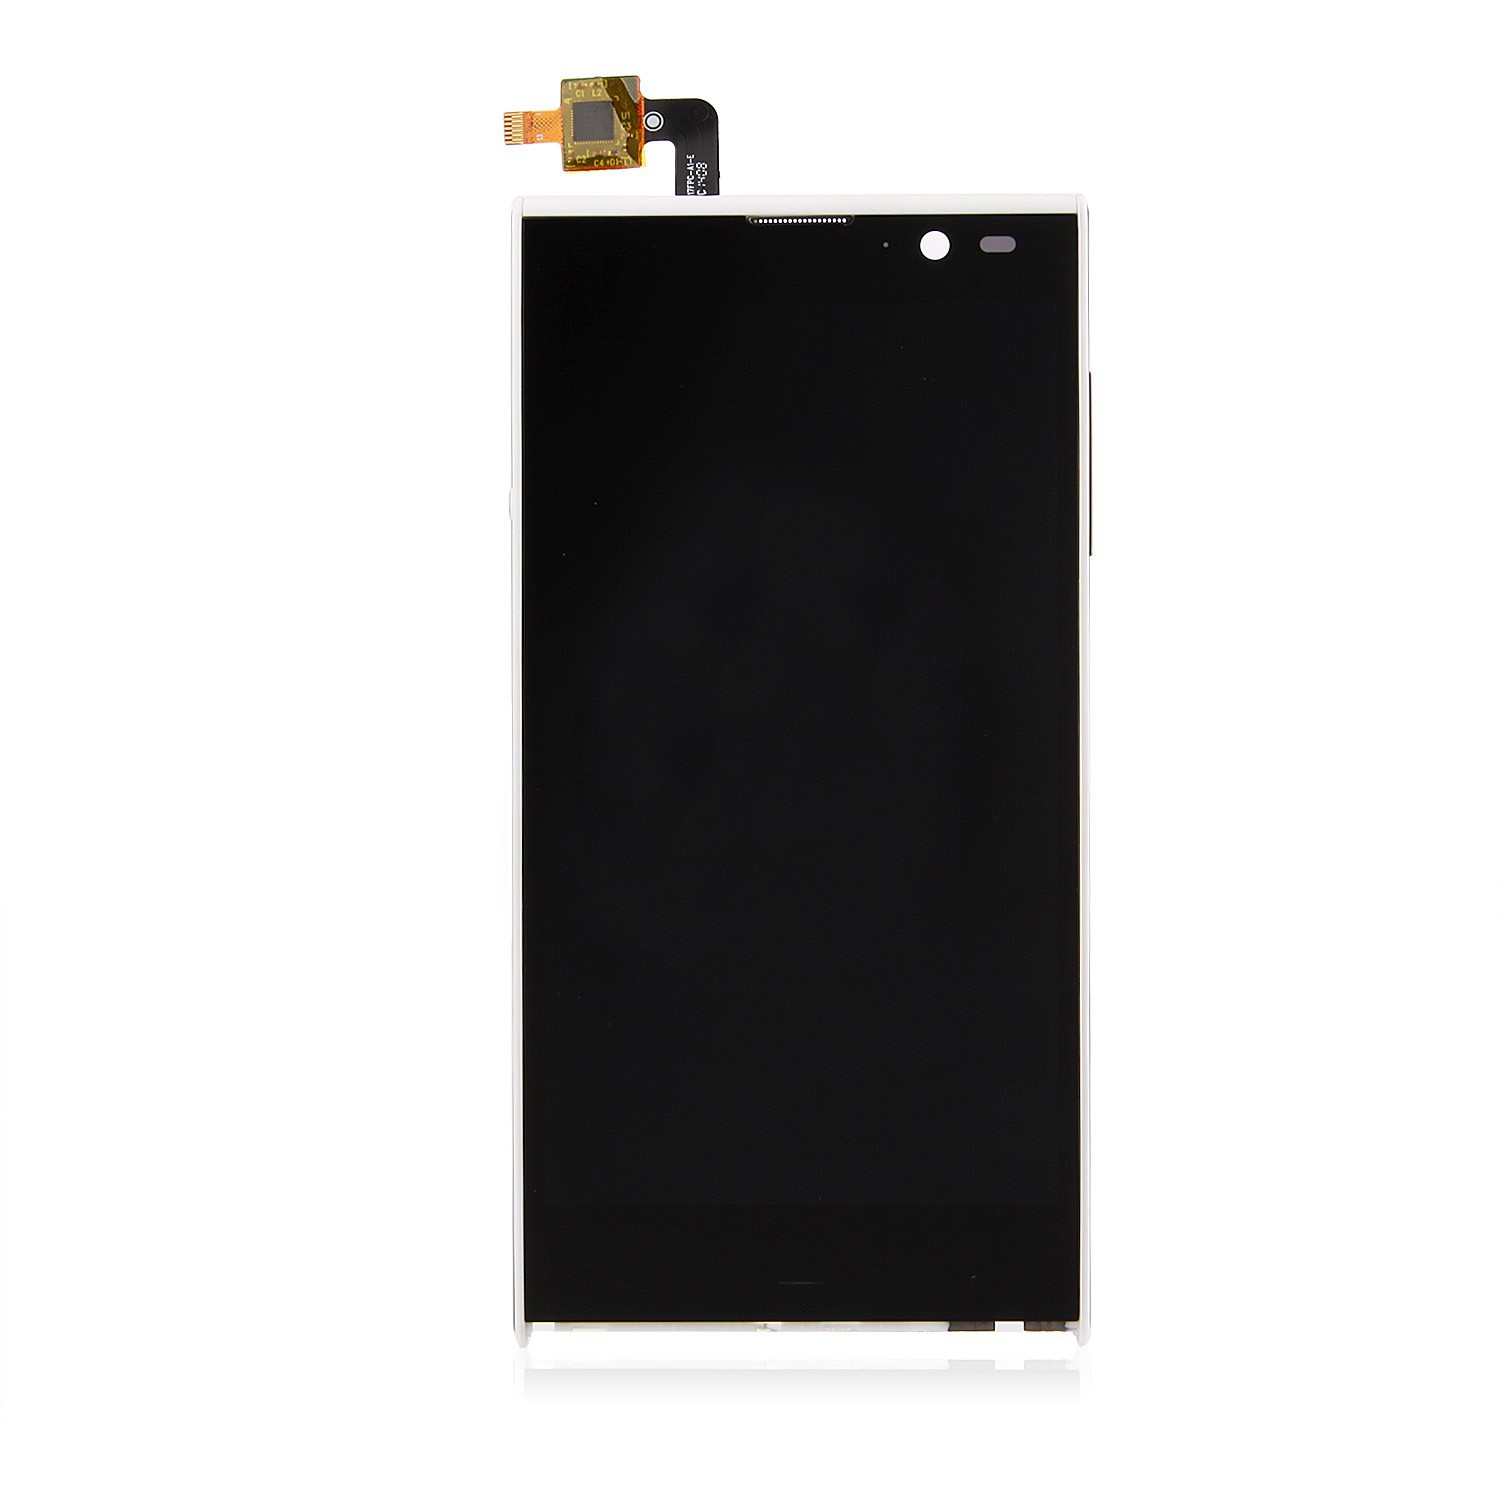 xolo Mobile Display Repair and Replacement In Chennai